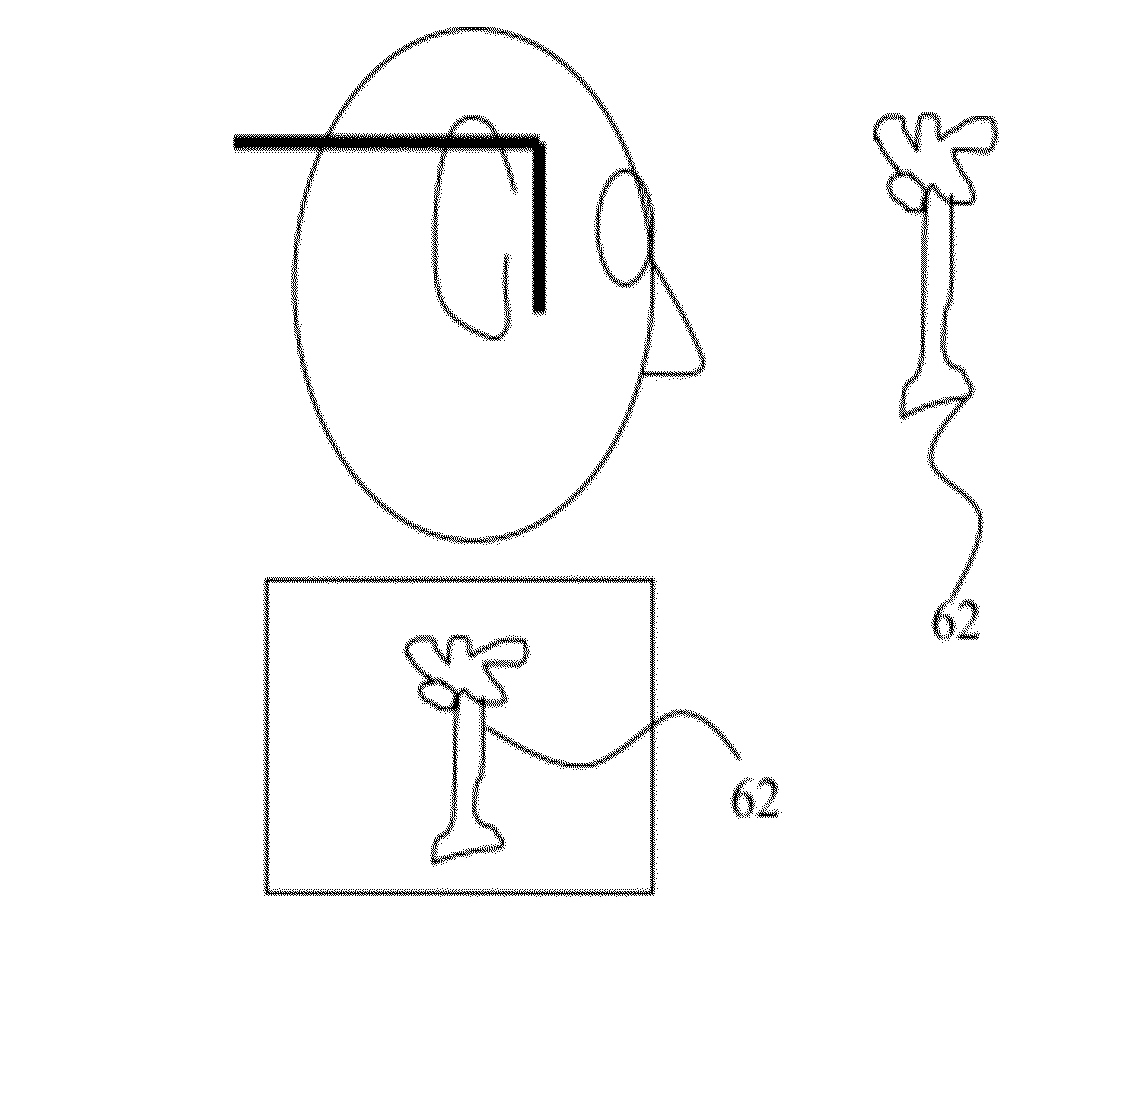 Switchable head-mounted display transition